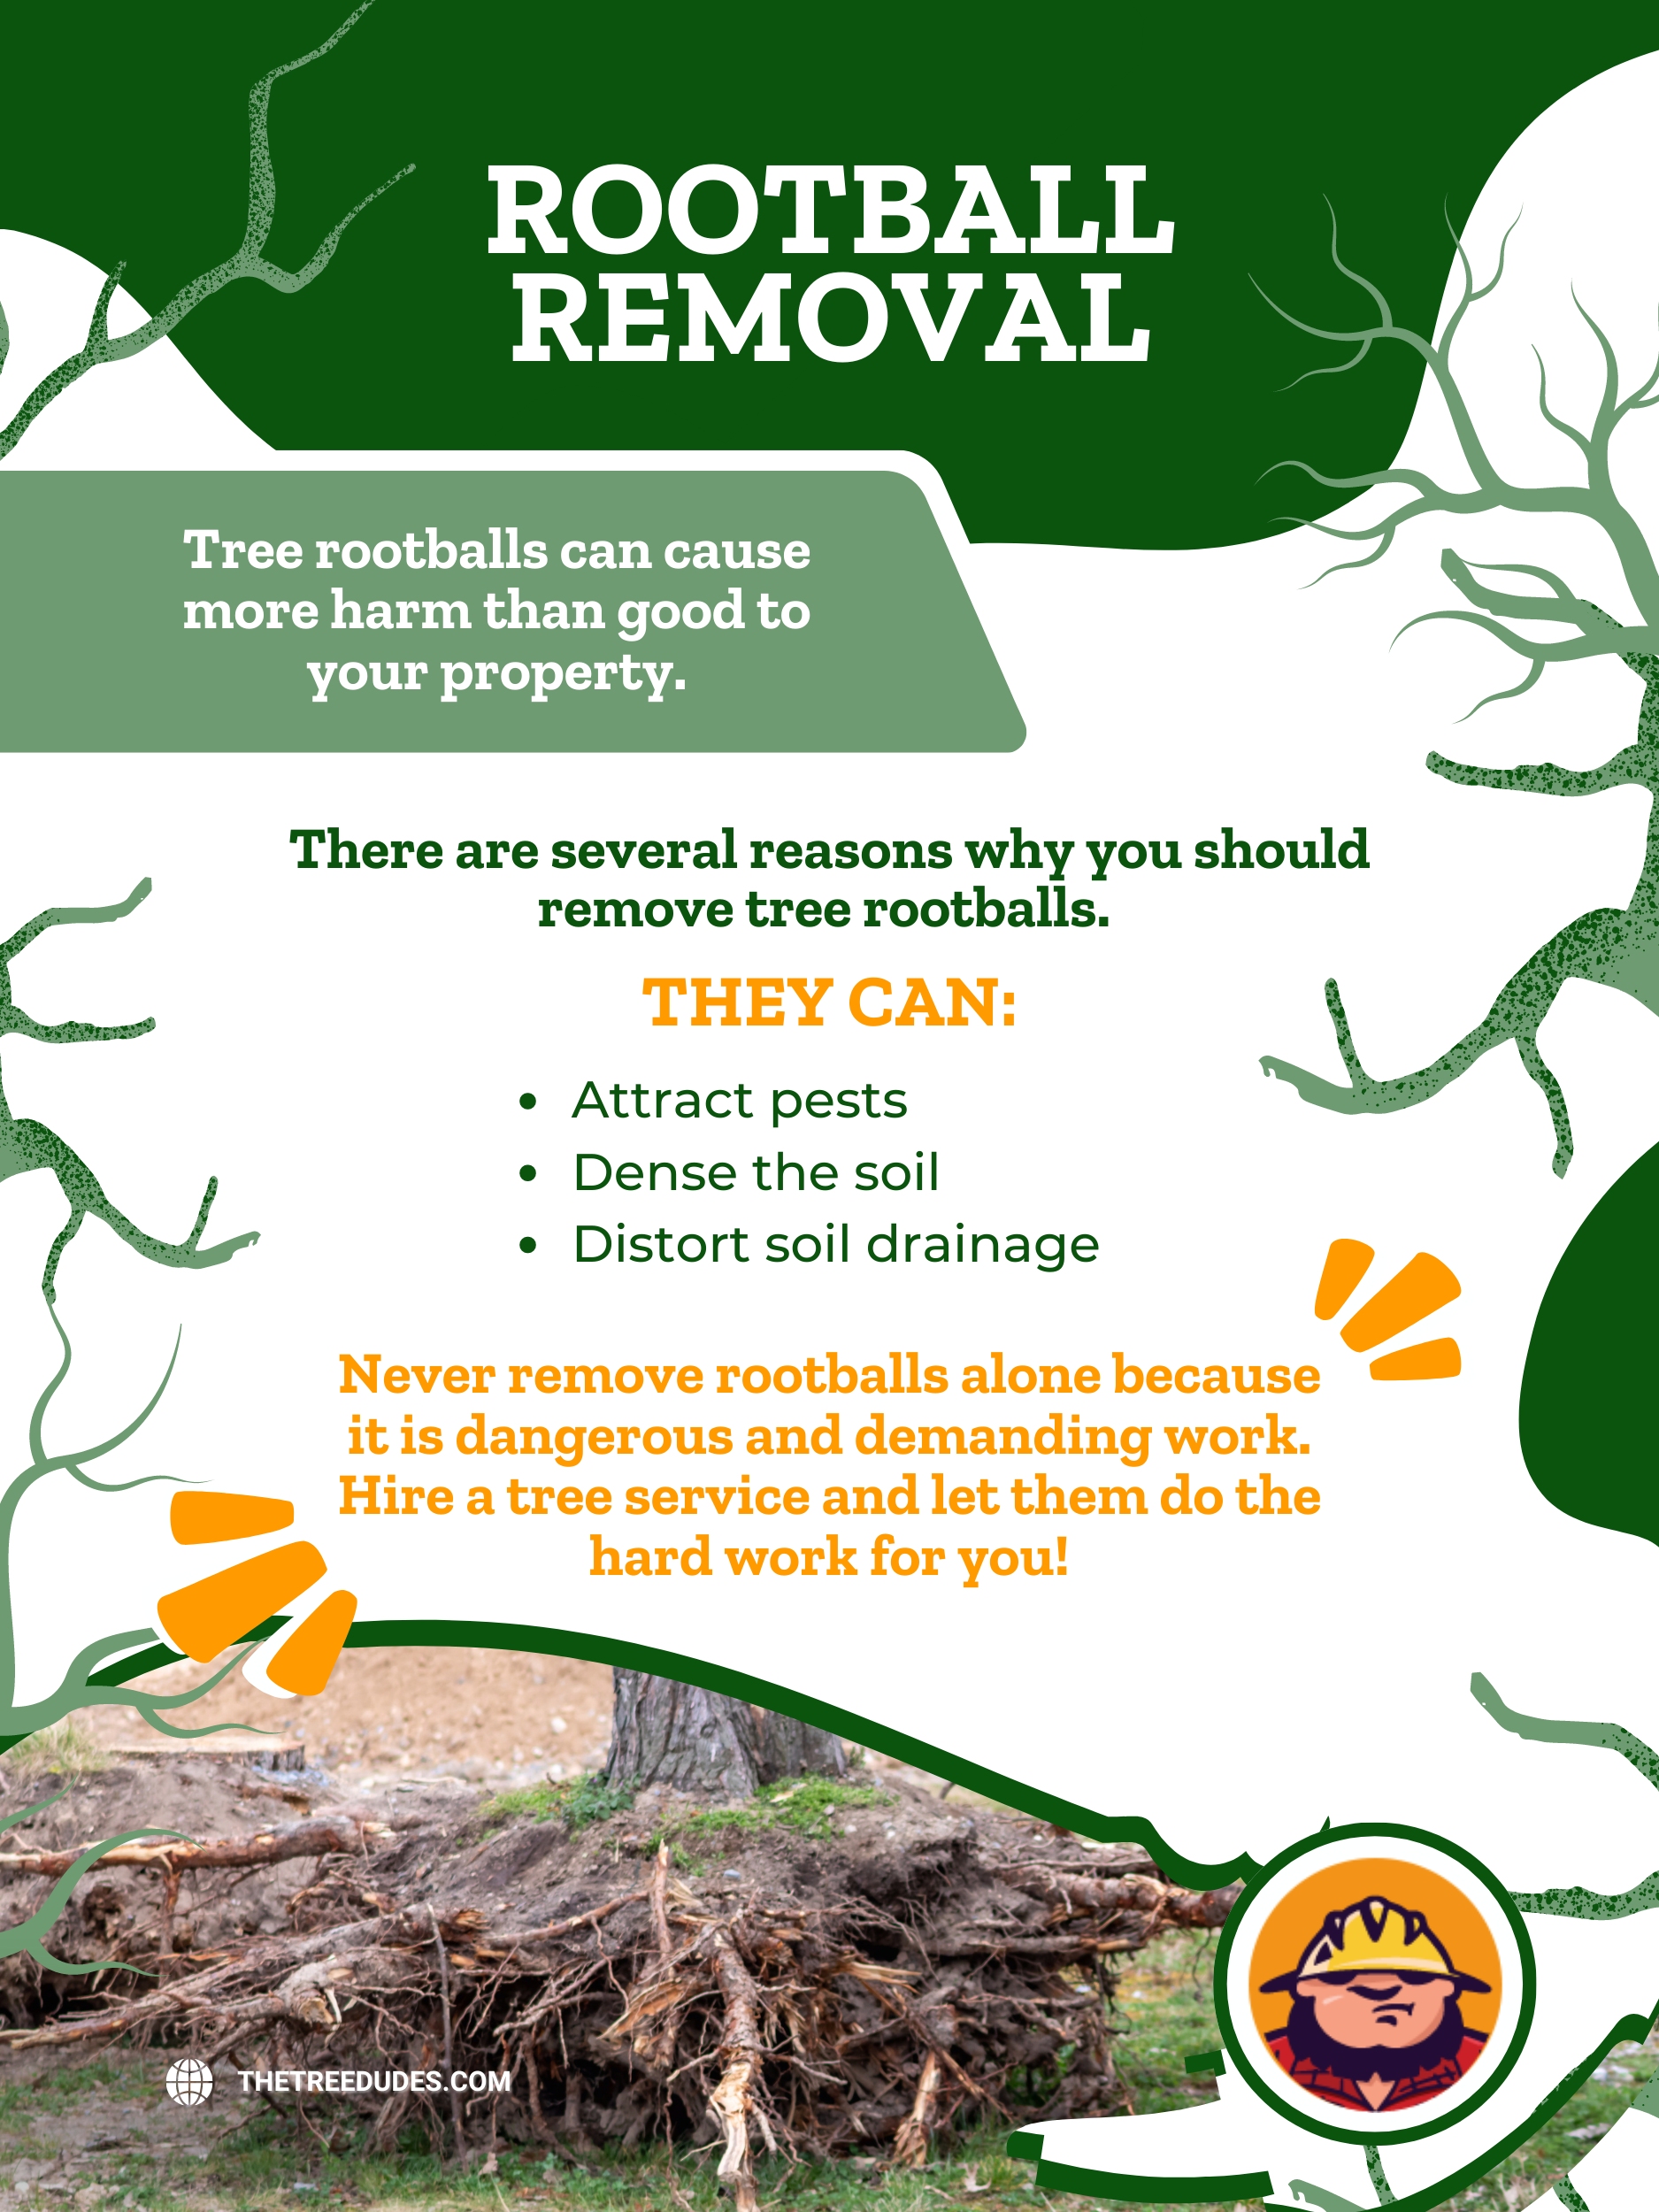 Rootball Removal Infographic